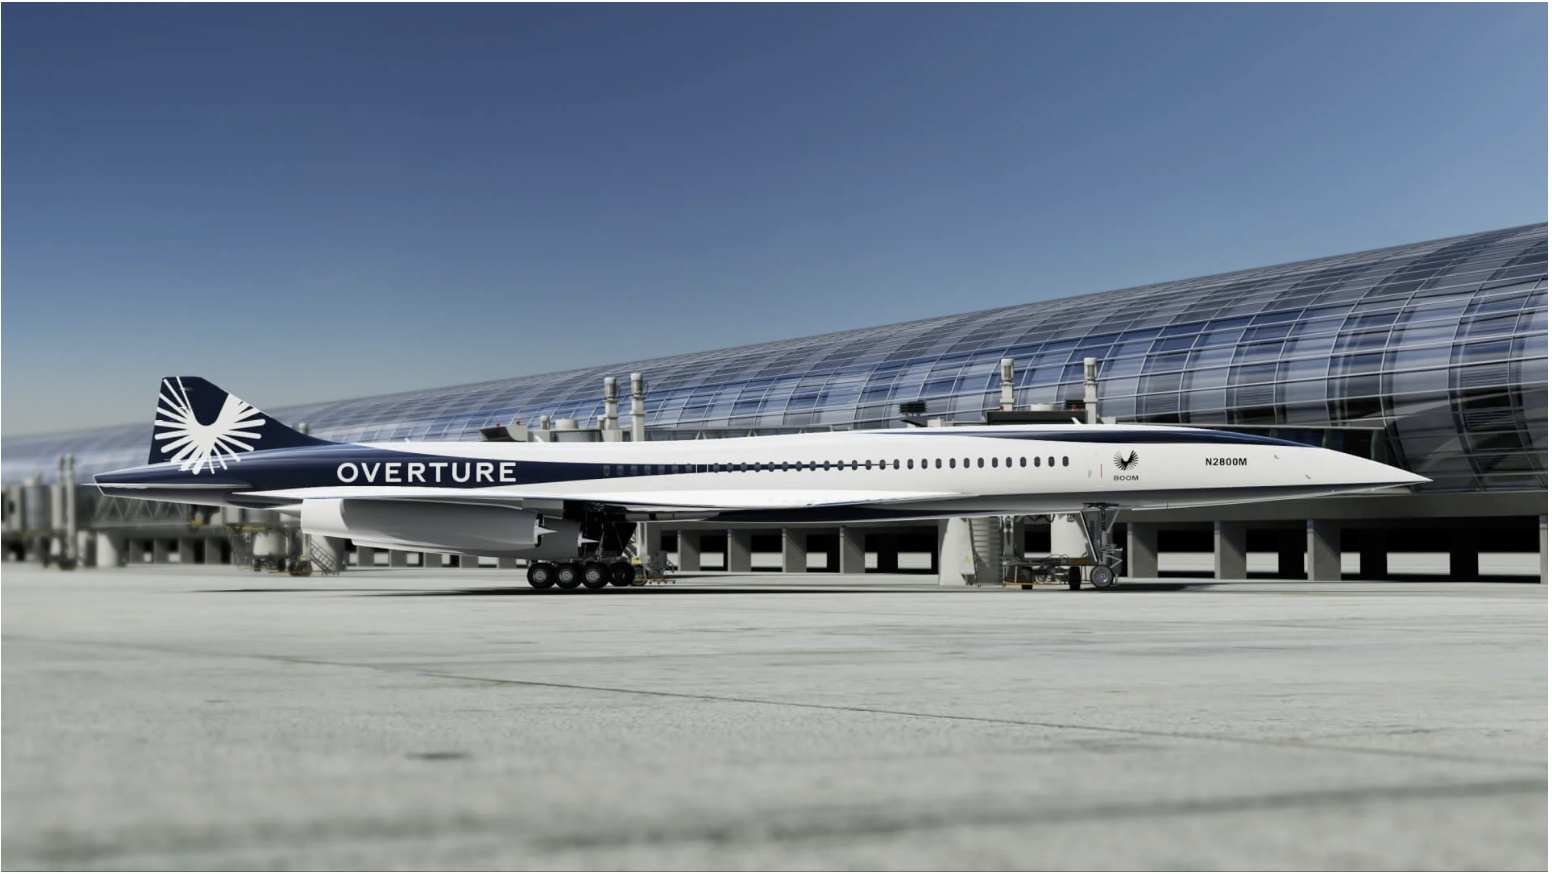 Boom announces three new suppliers for Overture supersonic plane